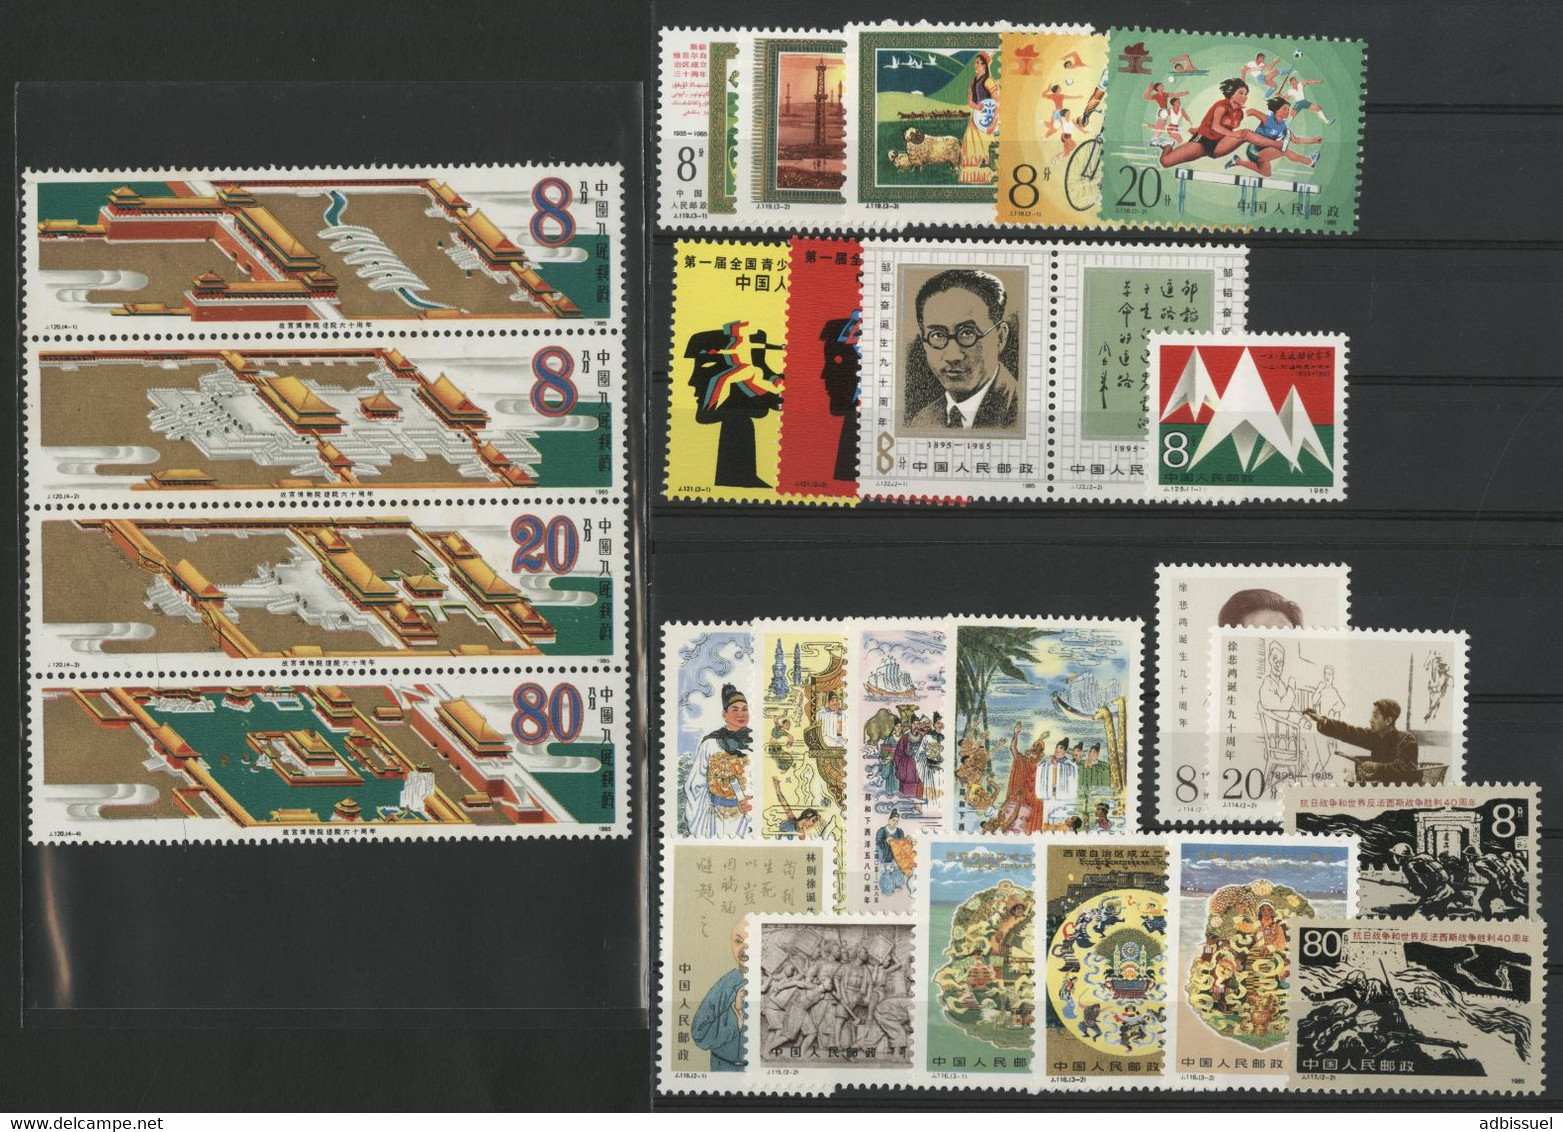 CHINA / CHINE 1985 Value 21 €. 28 Commemoratives Stamps MNH ** N° 2732 To 2758. VG/TB. - Nuevos